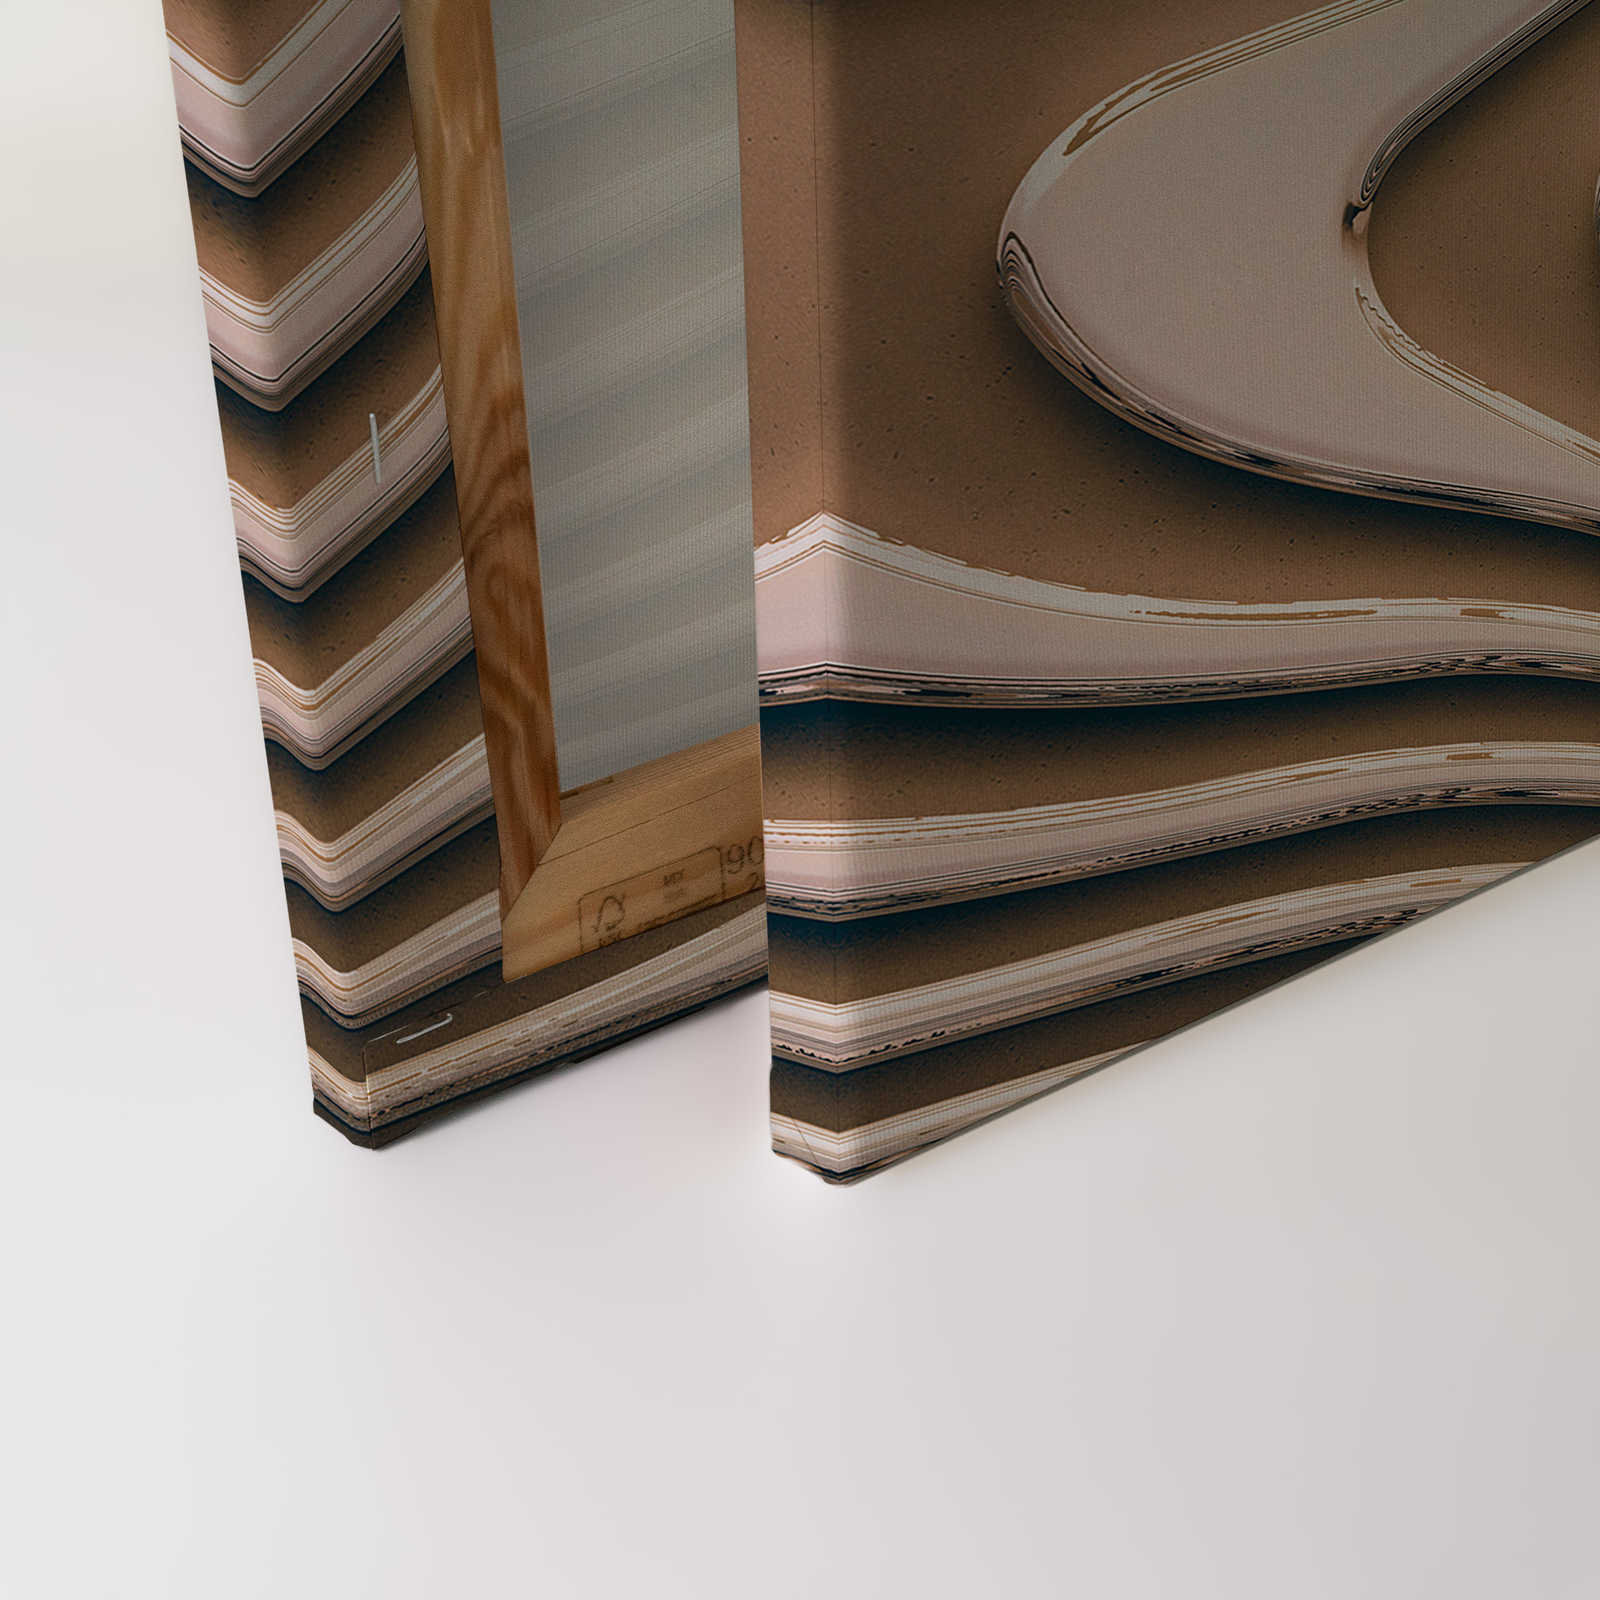             Canvas painting with wavy lines and shadows | beige, brown - 0.90 m x 0.60 m
        